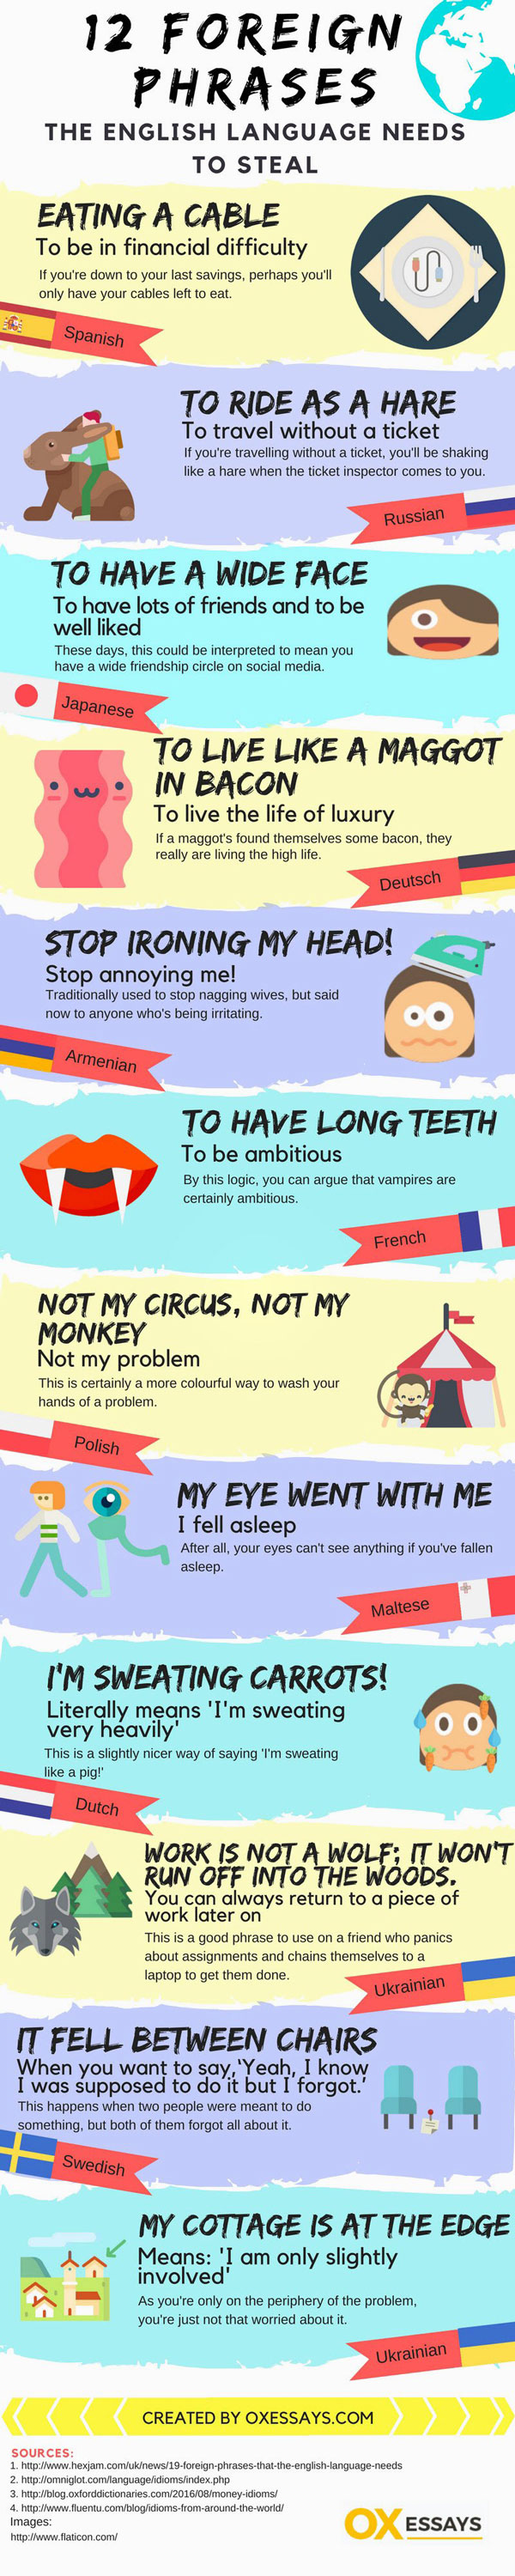 12-foreign-phrases-the-english-language-needs-to-steal-best-infographics